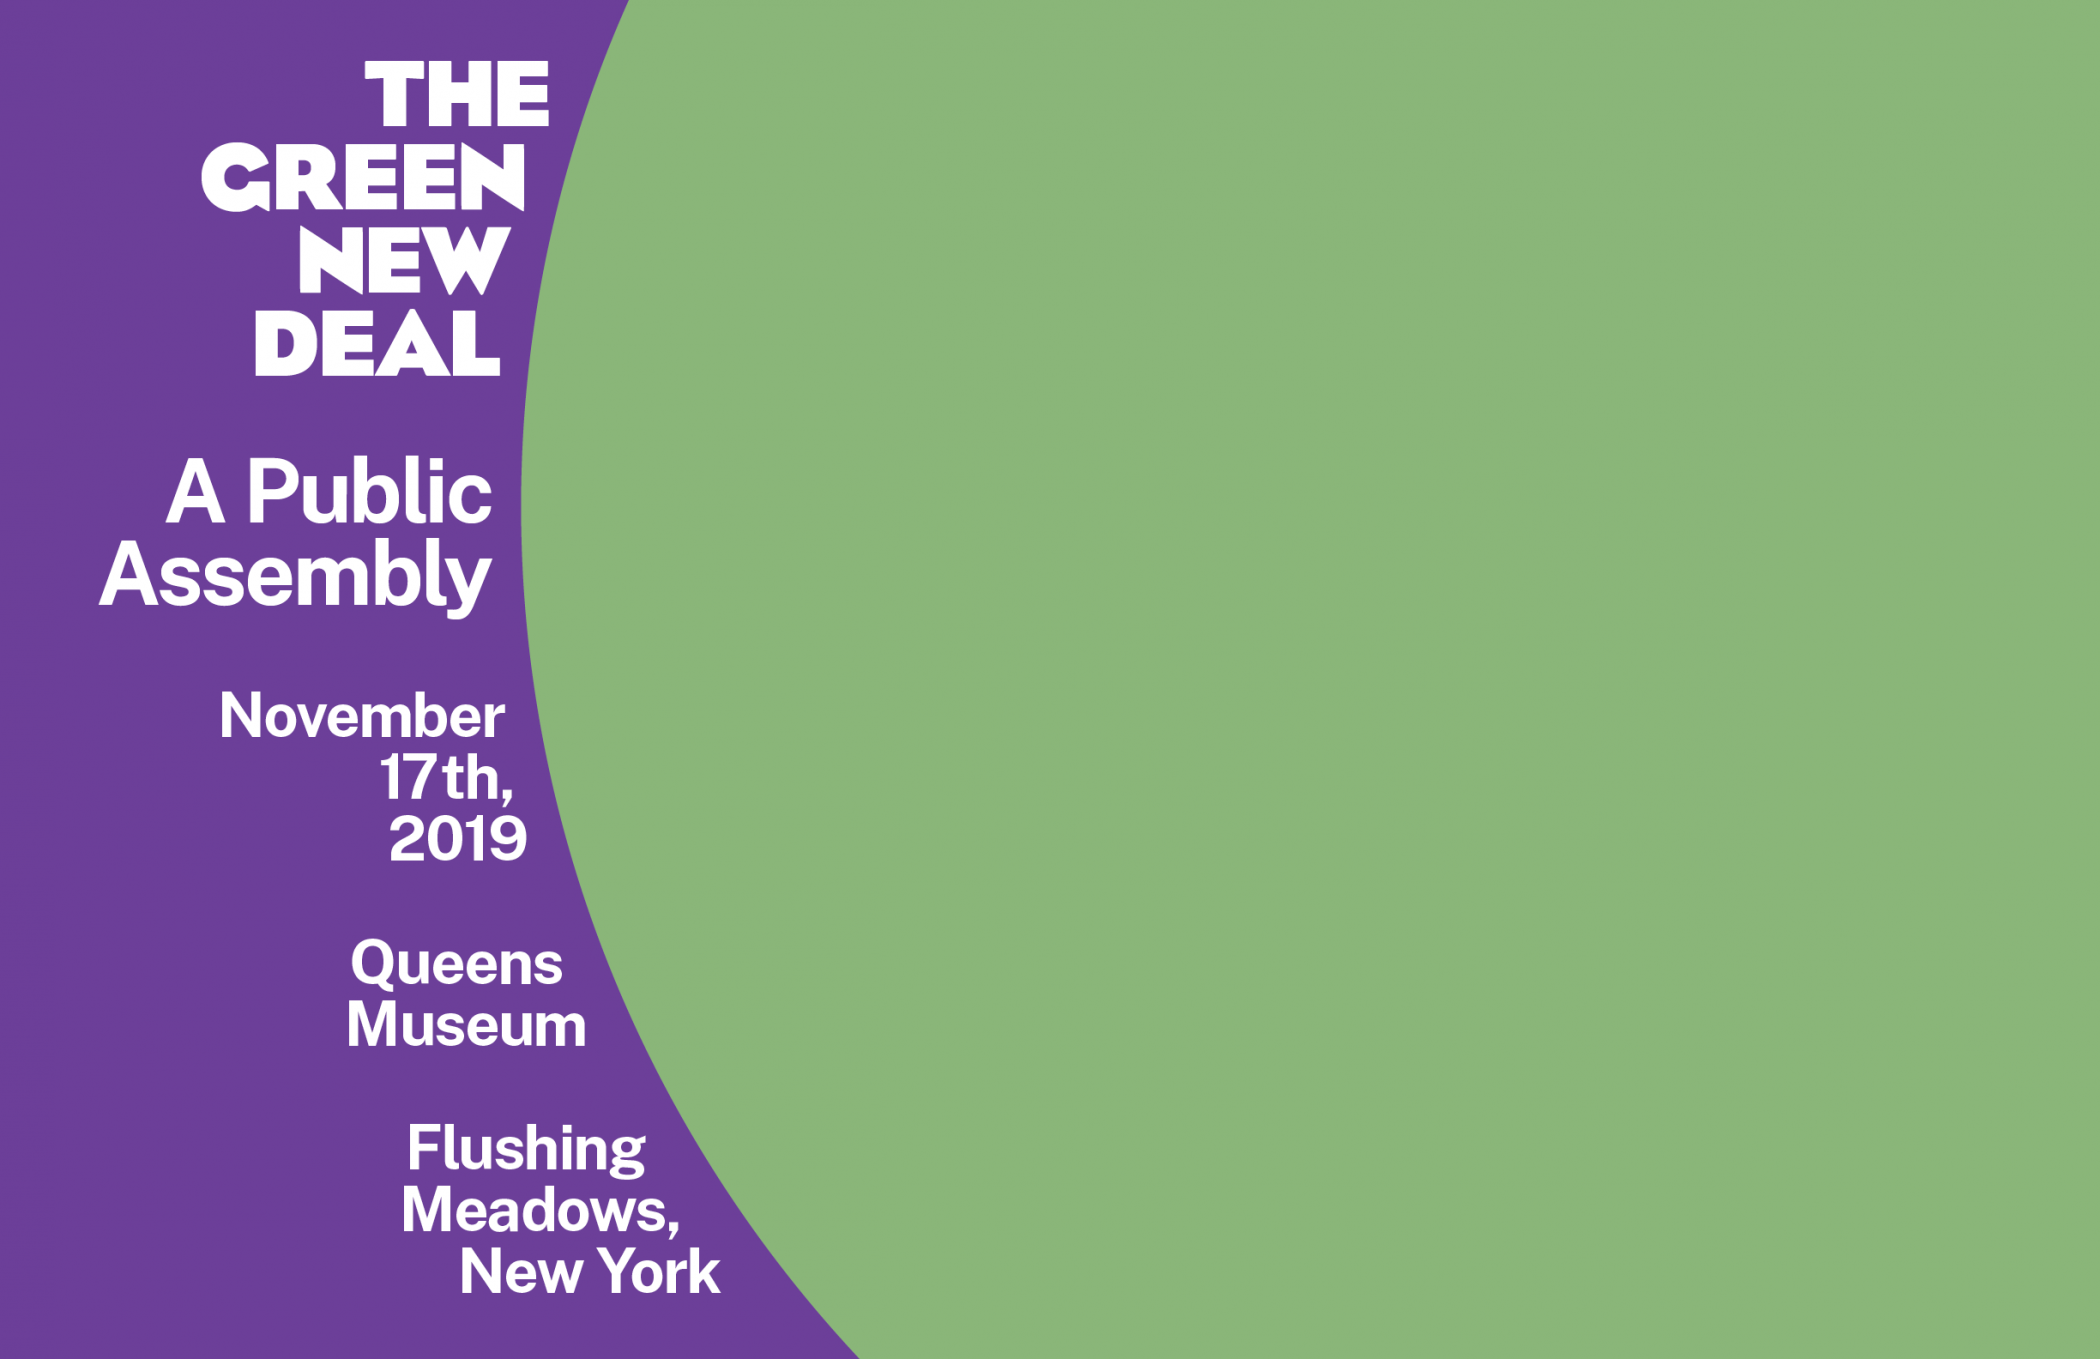 A green circle partially shown on the right side of the page abuts white text on a purple background reading: "The Green New Deal: A Public Assembly; November 17th, 2019, Queens Museum, Flushing Meadows, New York"